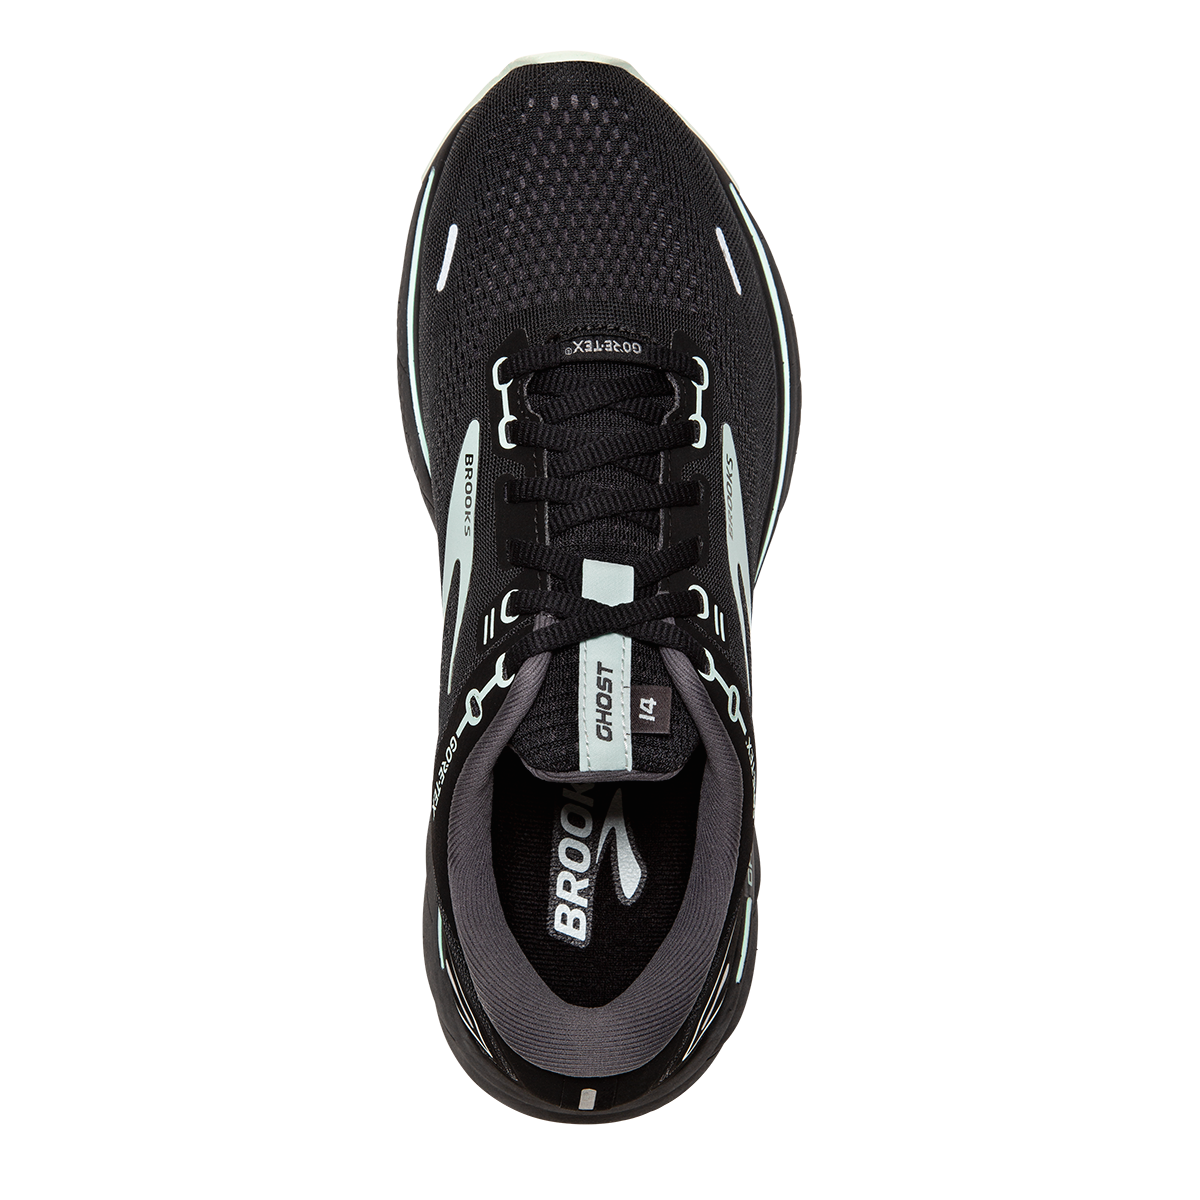 Brooks Ghost 14 GTX, , large image number null